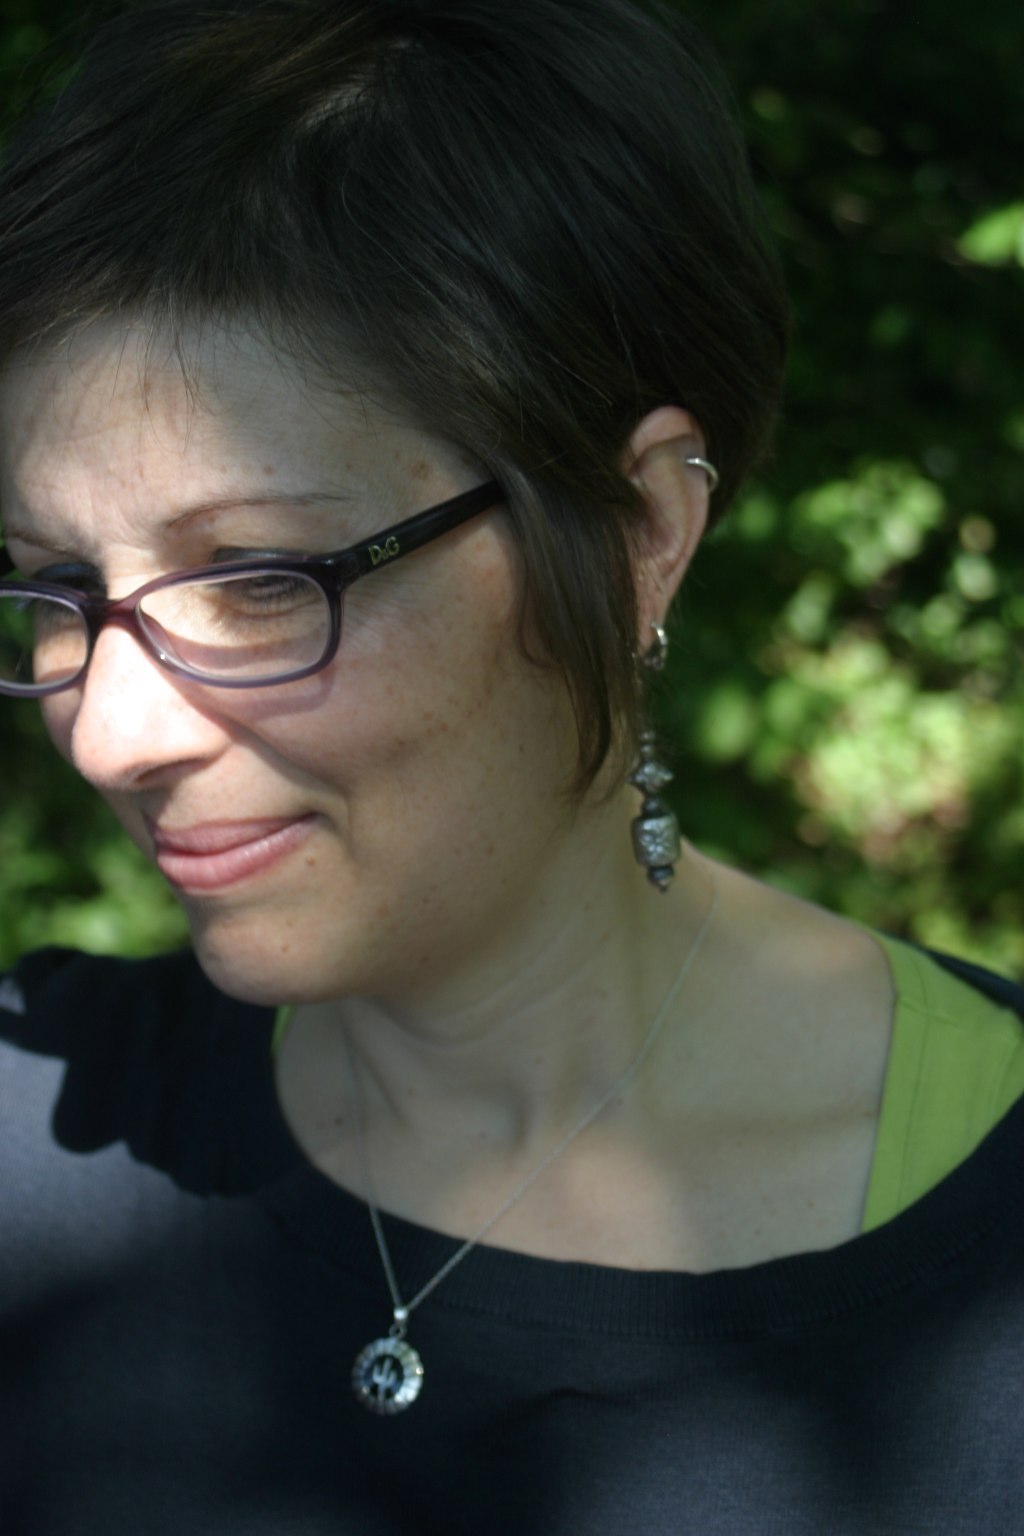 a woman wearing glasses looking down at soing